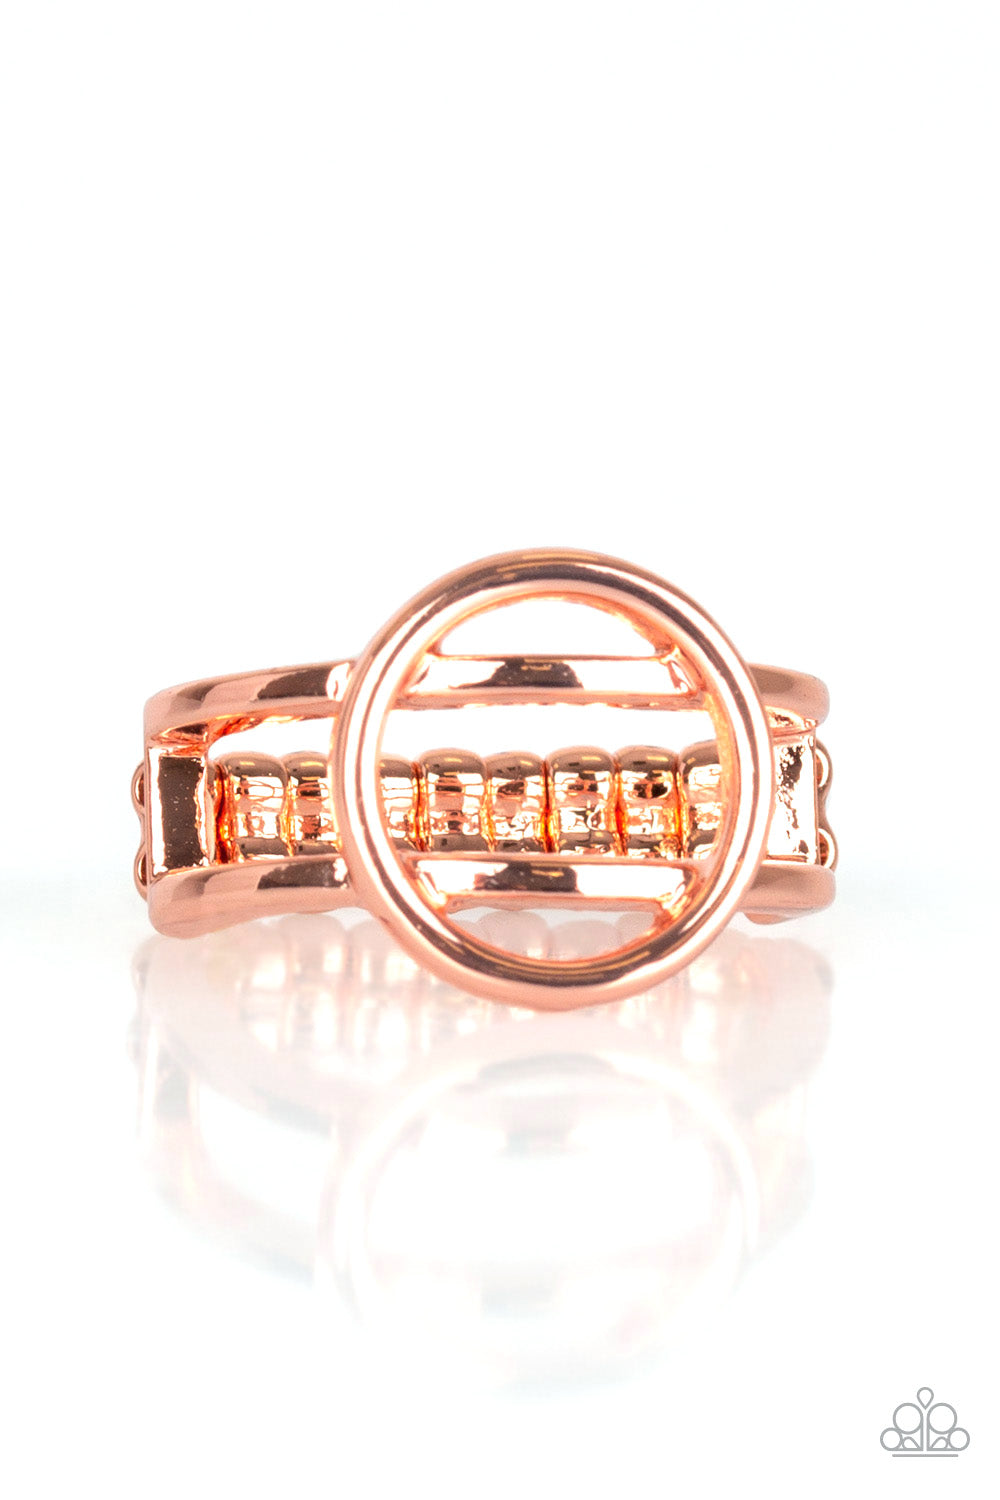 CITY CENTER CHIC - COPPER HOLLOW CIRCLE RING